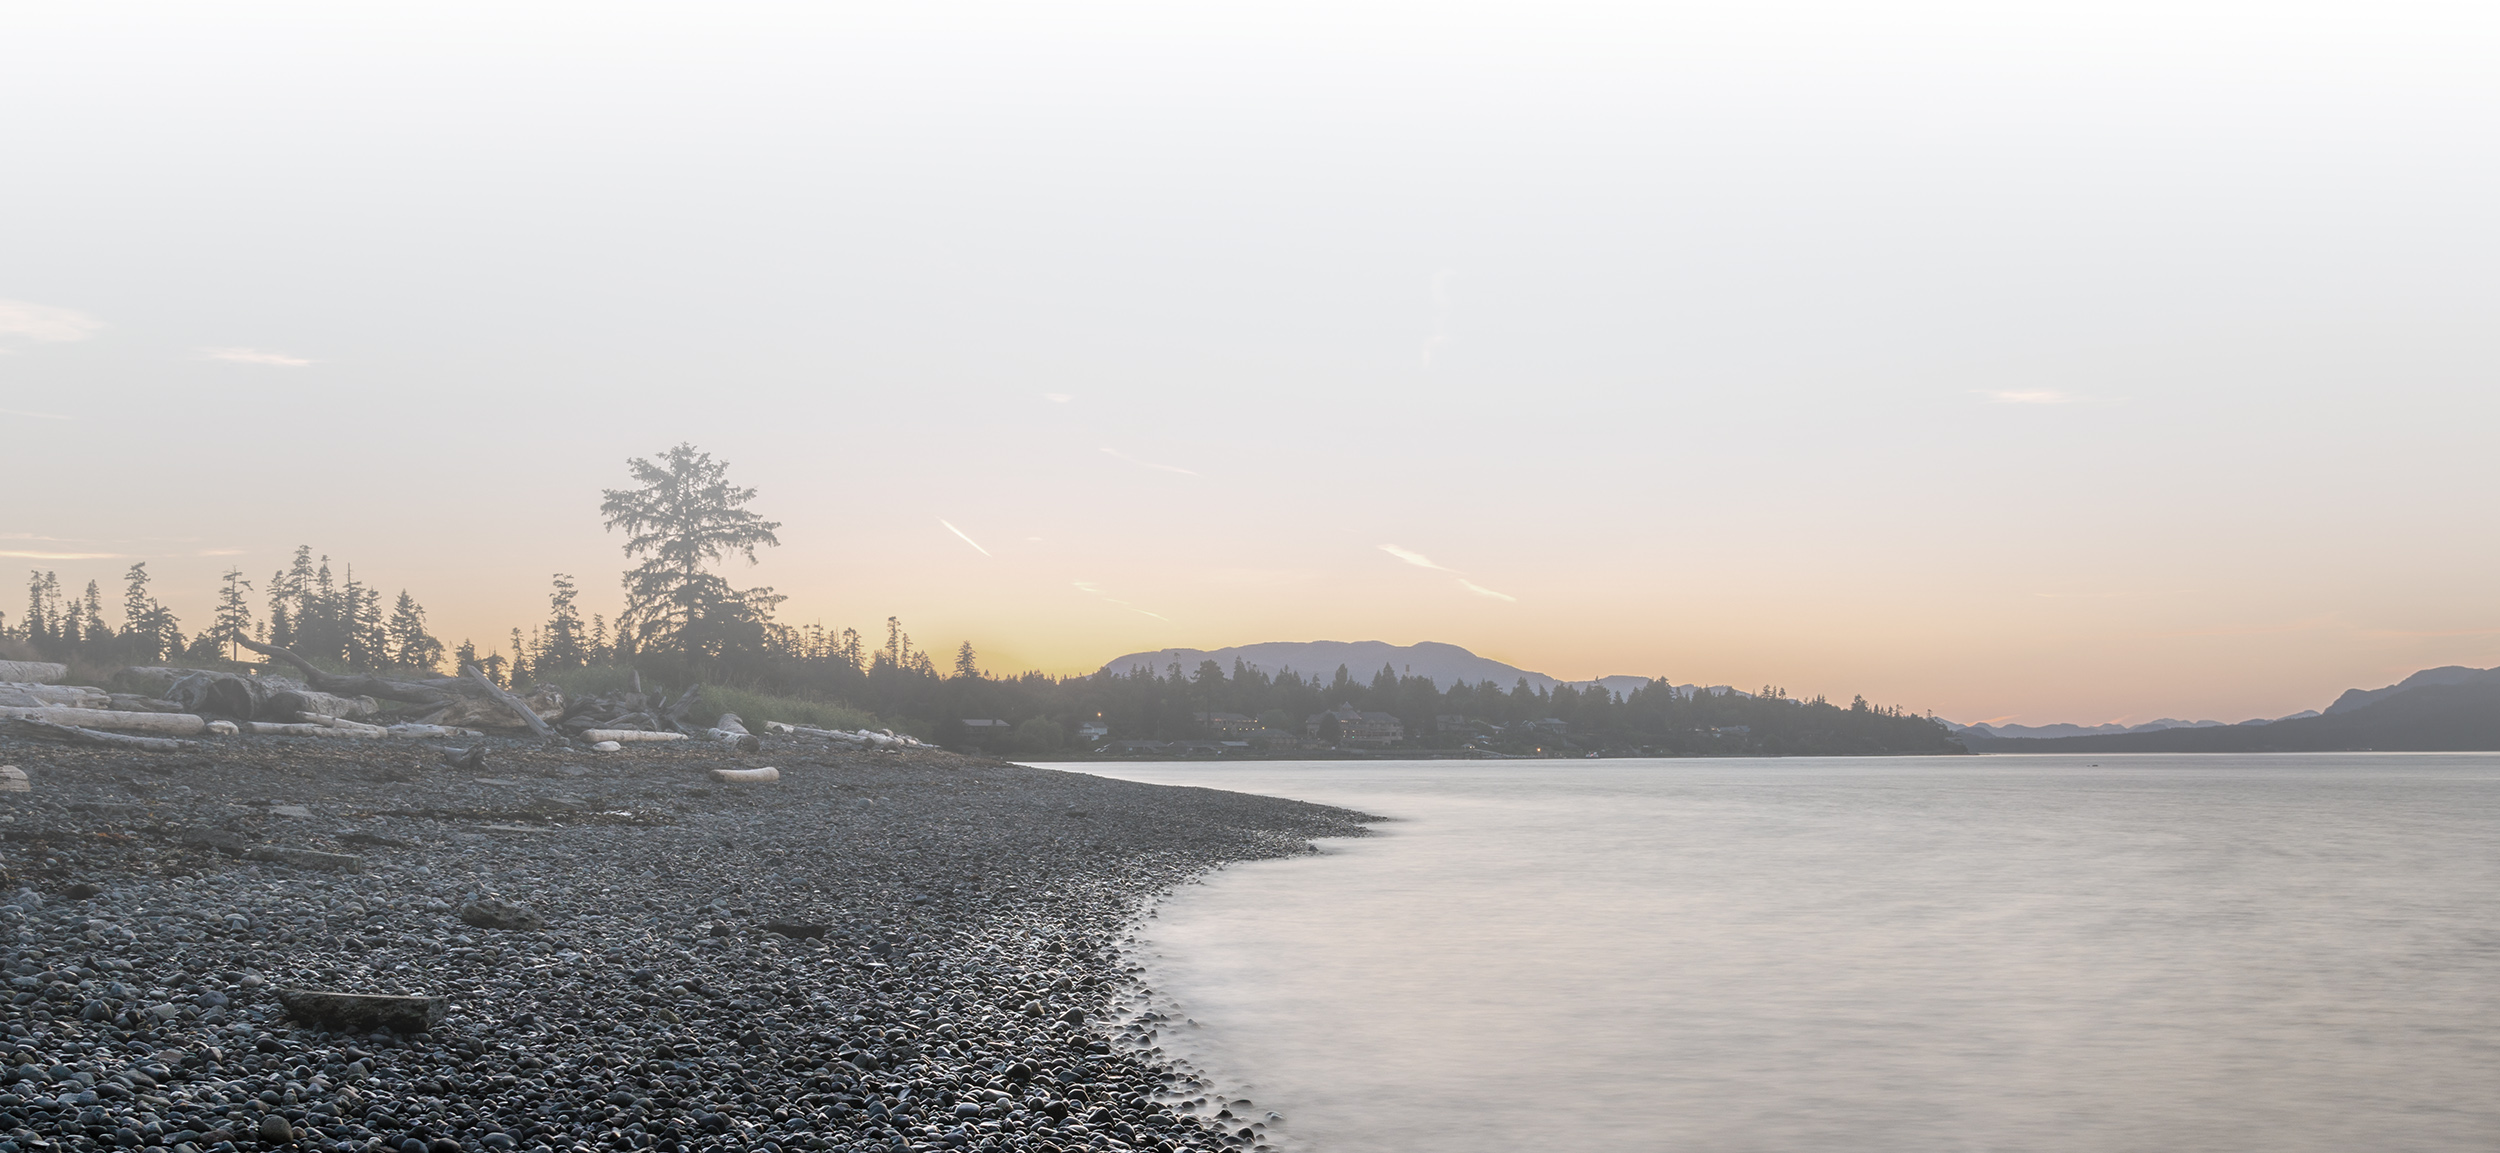 Empty Rocky Beach at Dusk. Campbell River, BC, Canada.